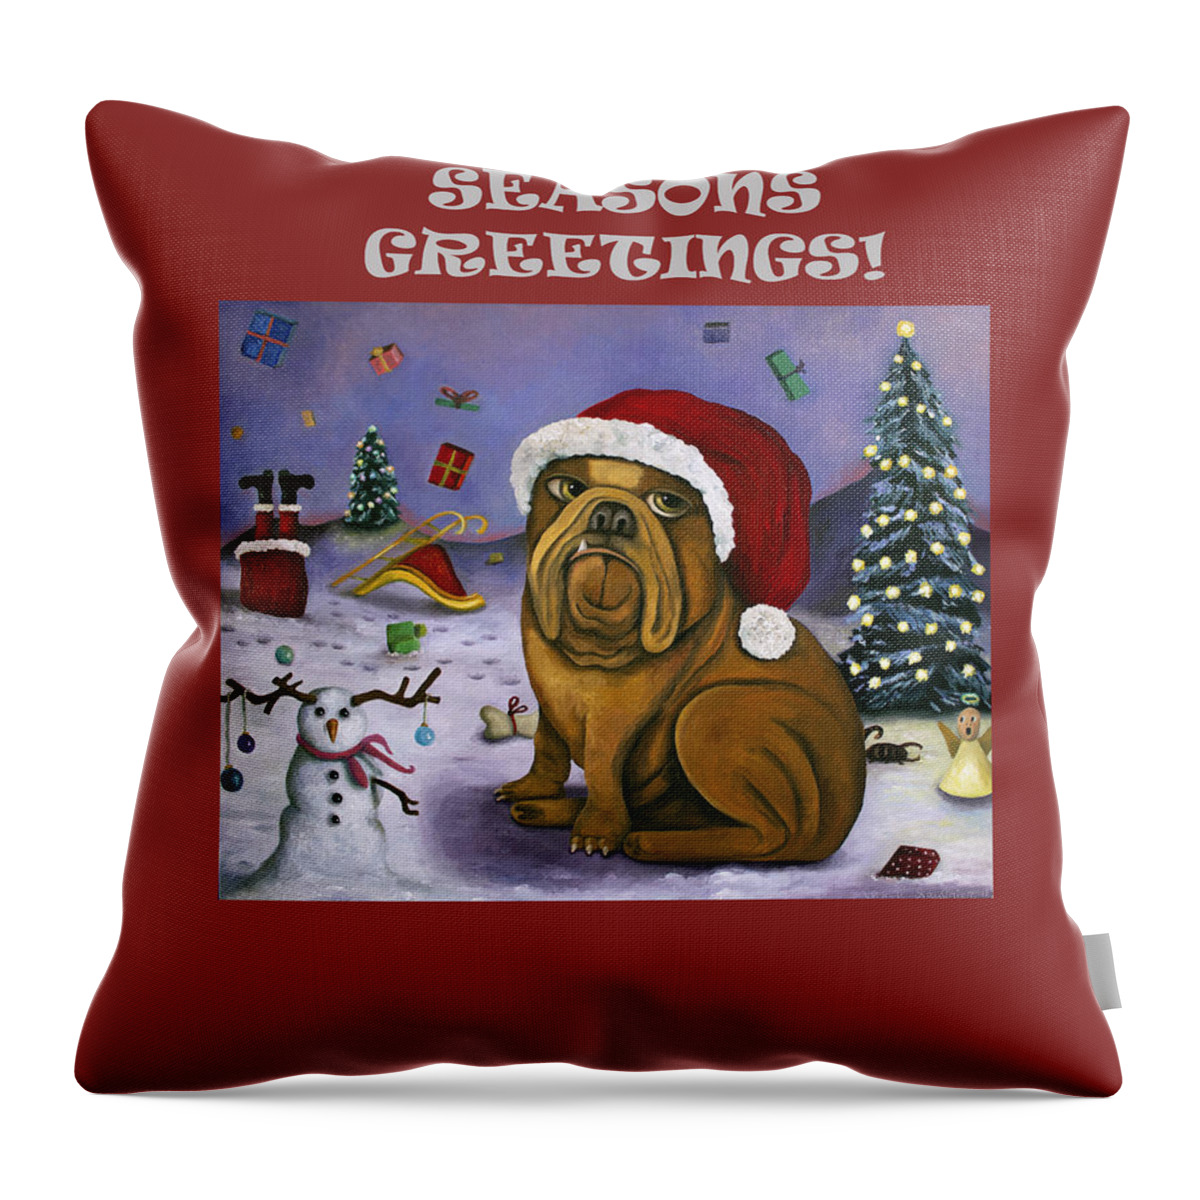 Seasons Greetings Throw Pillow featuring the painting Seasongs Greetings with Chritmas Crash by Leah Saulnier The Painting Maniac